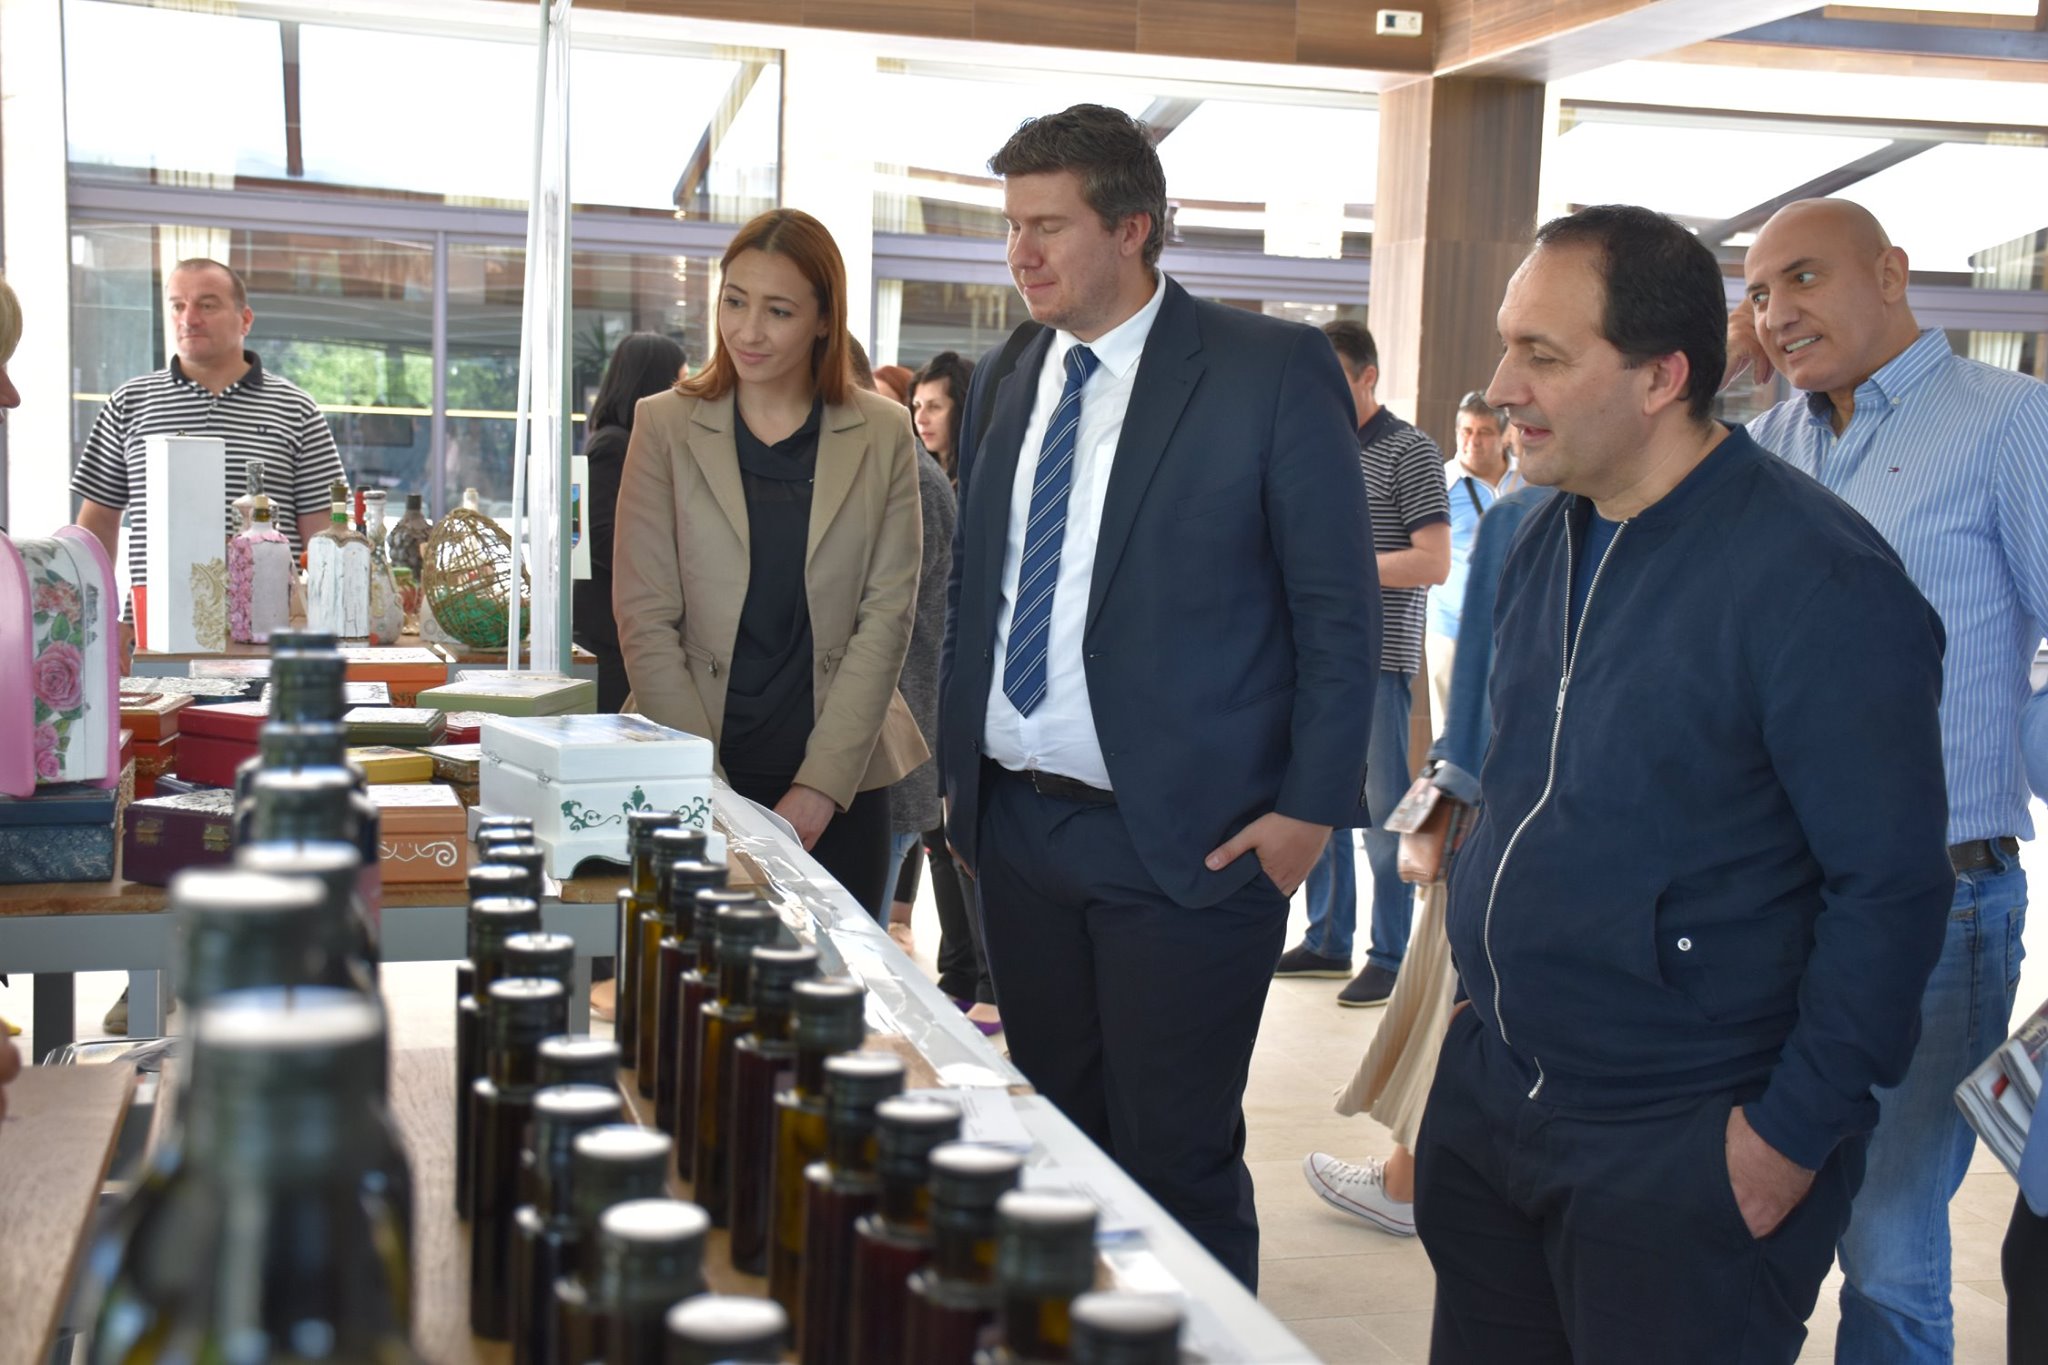 In Berane held the first fair for the employment of persons with disabilities in Montenegro